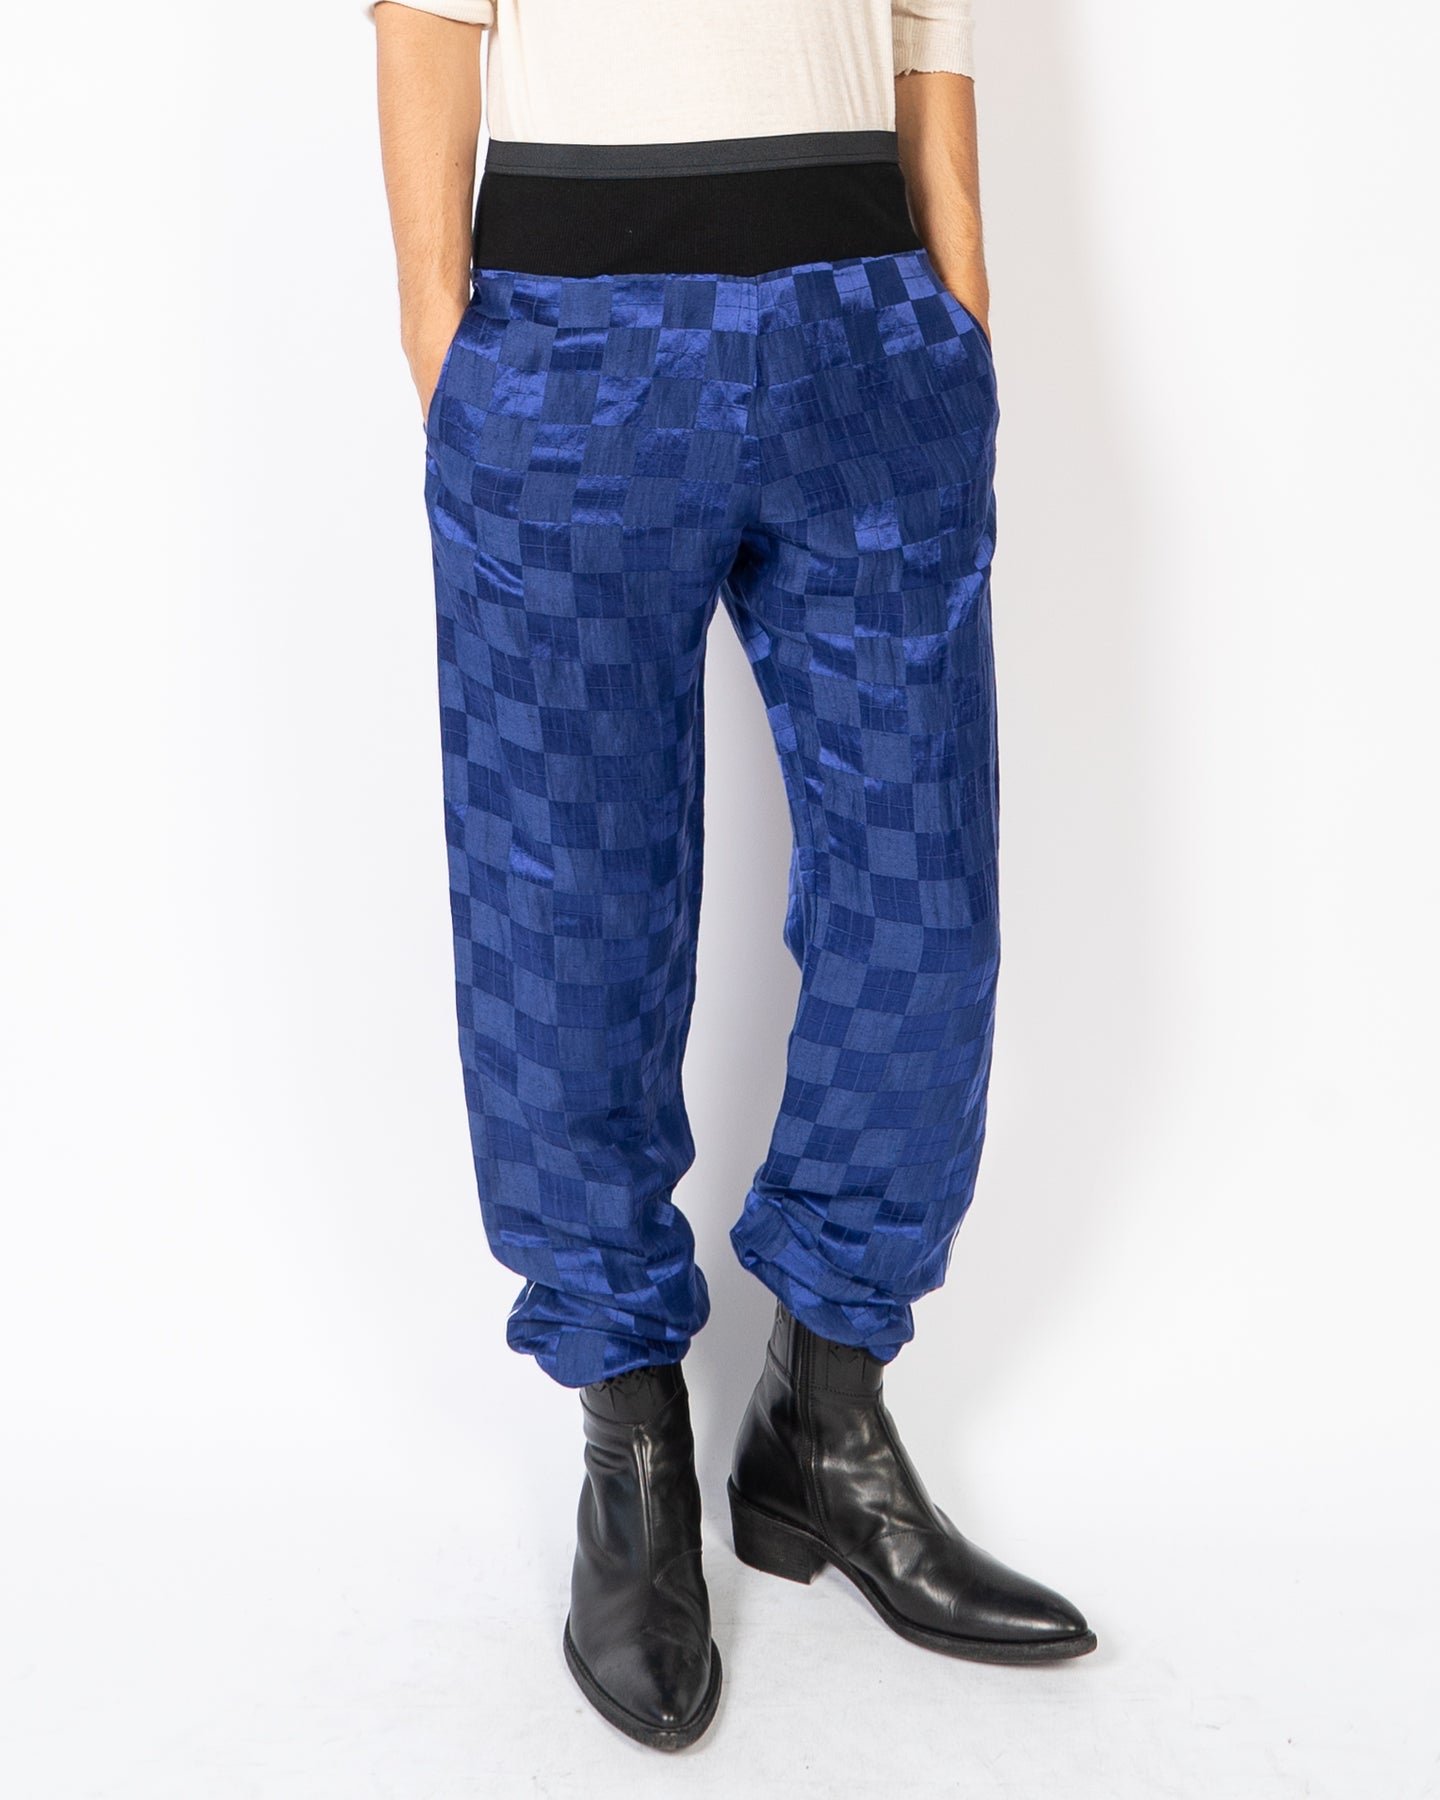 SS20 Sapeur Royal Blue Checked Silk Trousers